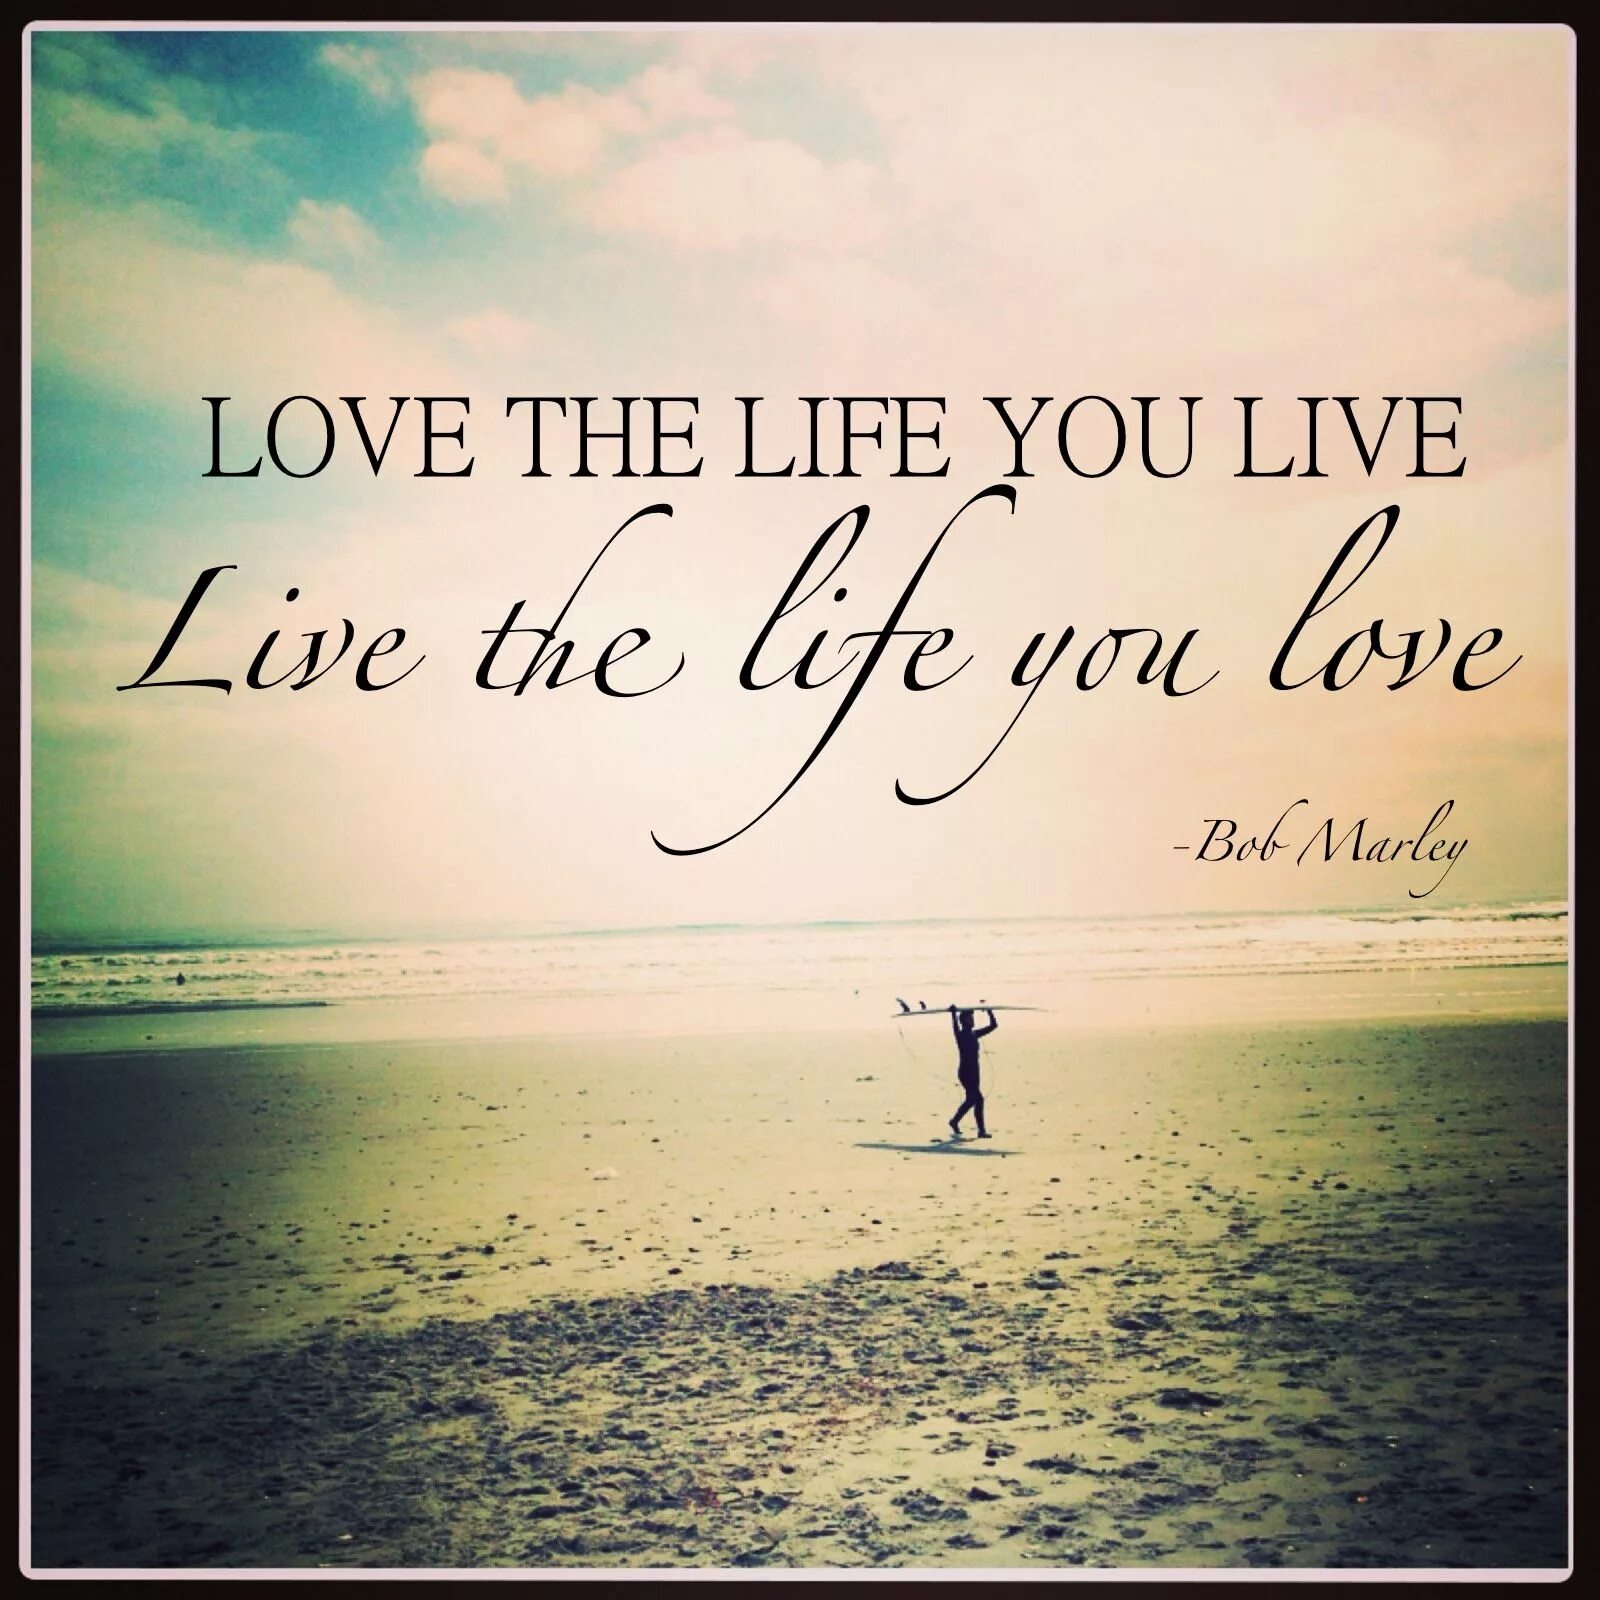 Love the Life you Live. Love the Life you Live. Live the Life you Love.. Love the Life you Live. Live the Life you Love. Перевод. Live the Life you Love Love the Life you Live обои айфон.